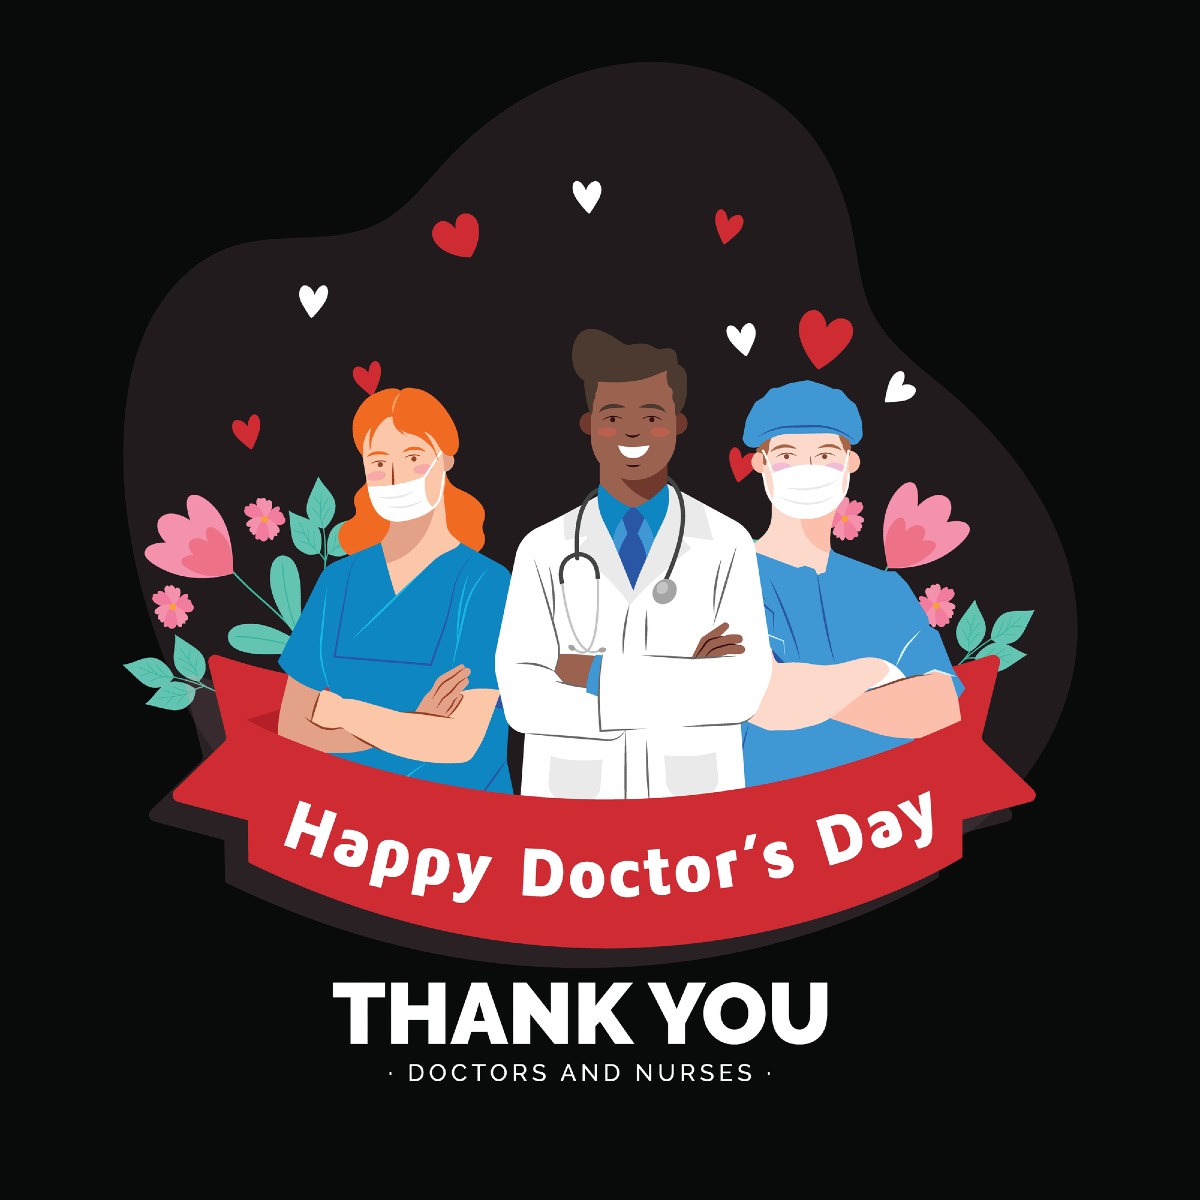 Happy National Doctors' Day 2021 Images, Quotes, Wishes & Messages to